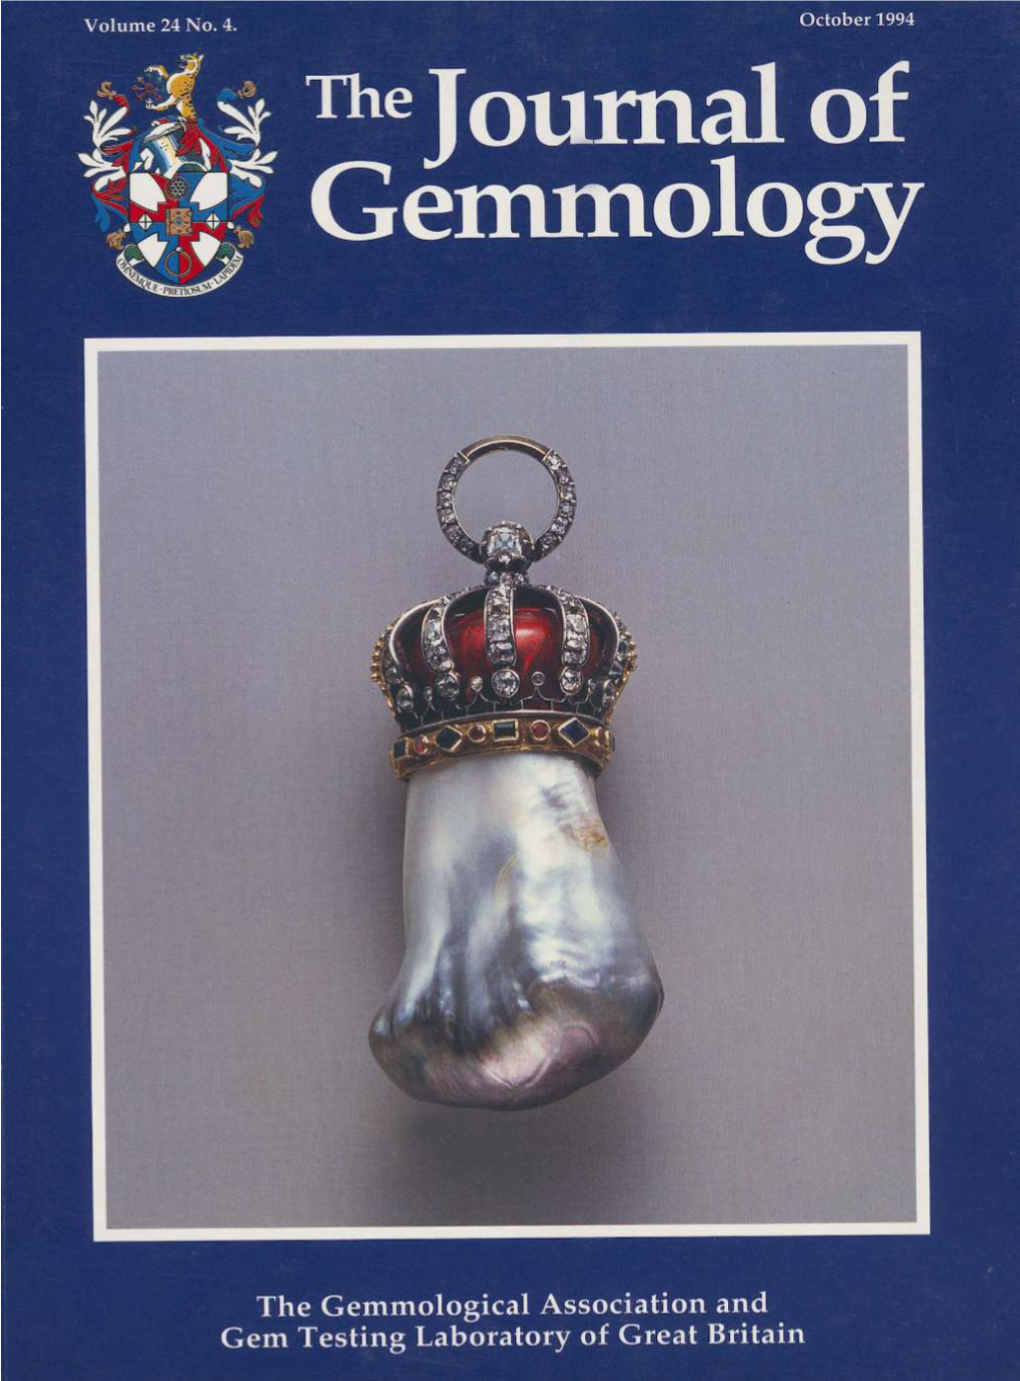 Advertising in the Journal of Gemmology